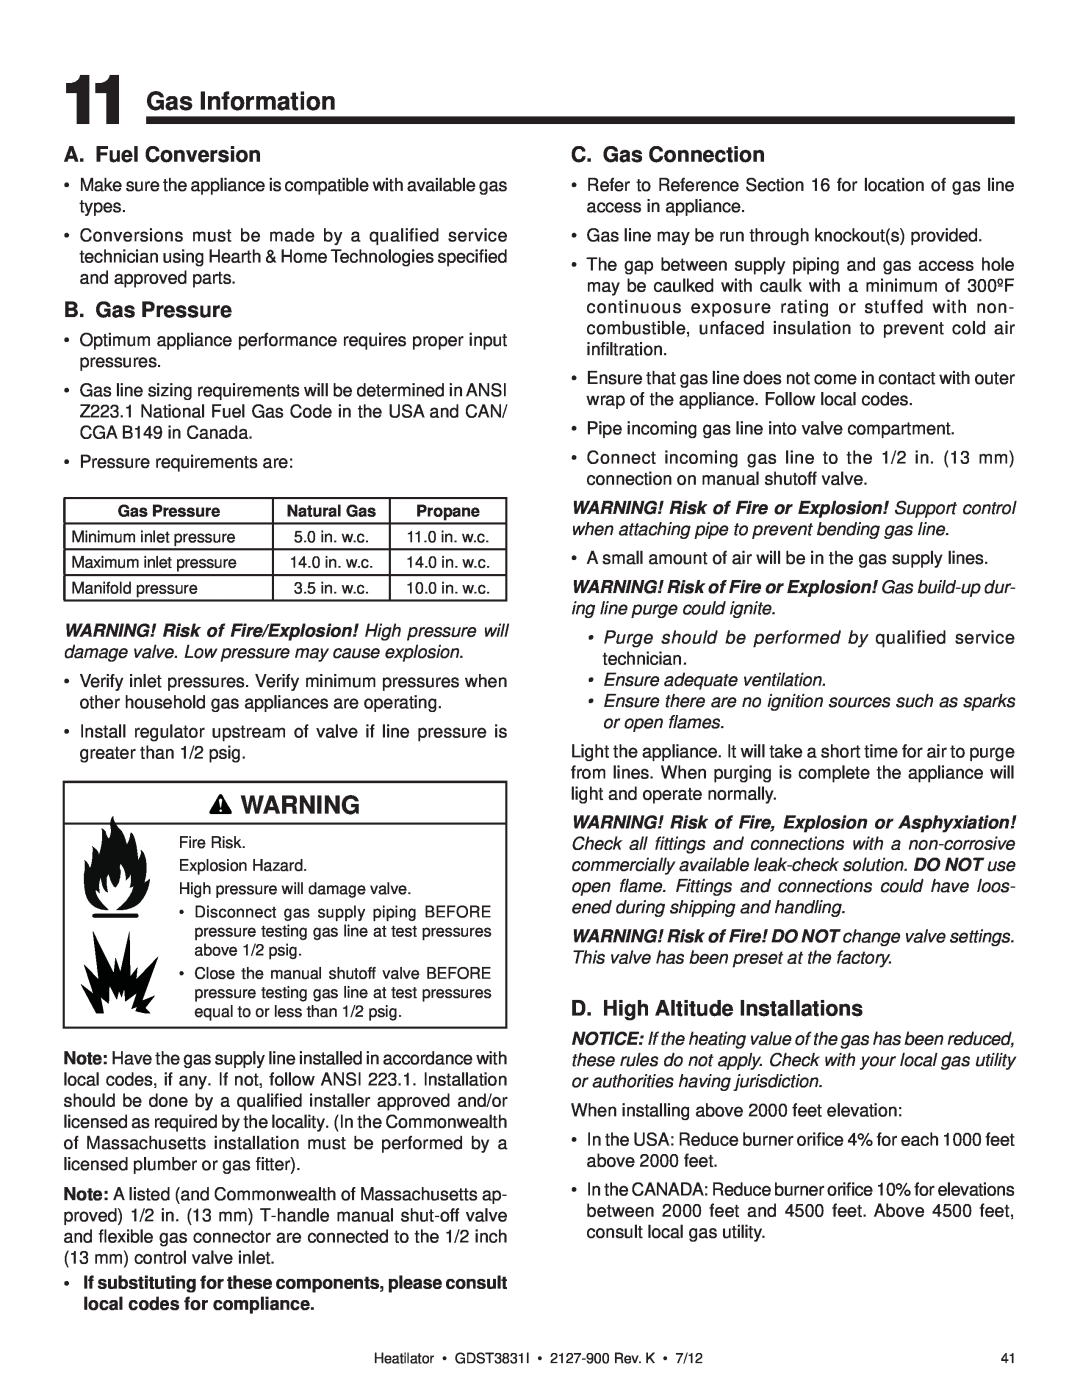 Heatiator GDST3831I owner manual Gas Information, A. Fuel Conversion, B. Gas Pressure, C. Gas Connection 